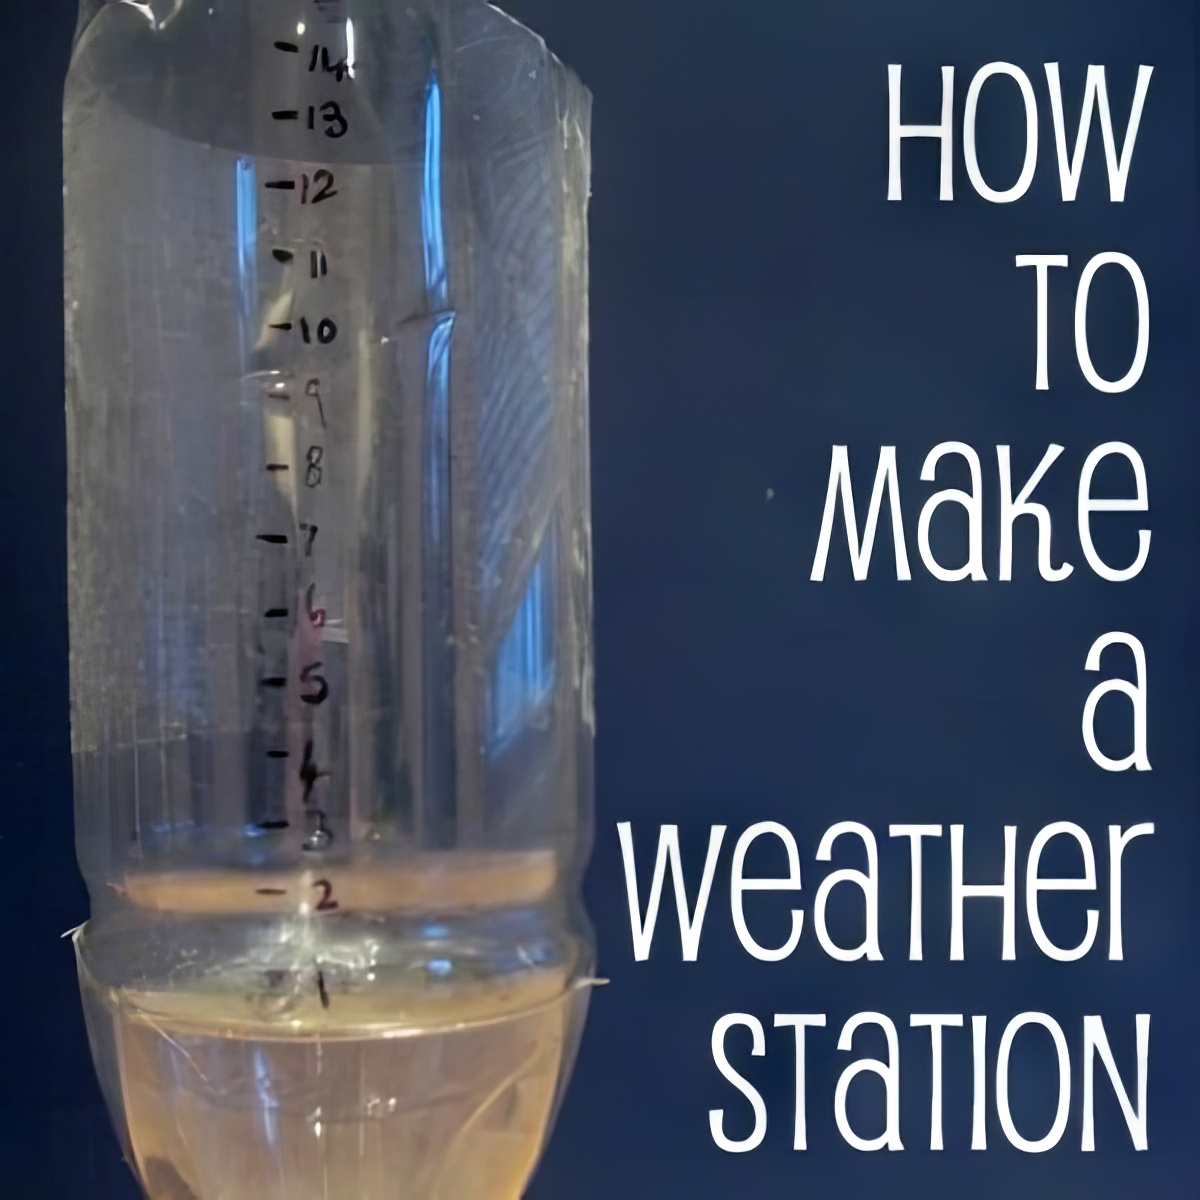 weather station, fun weather ideas for kids